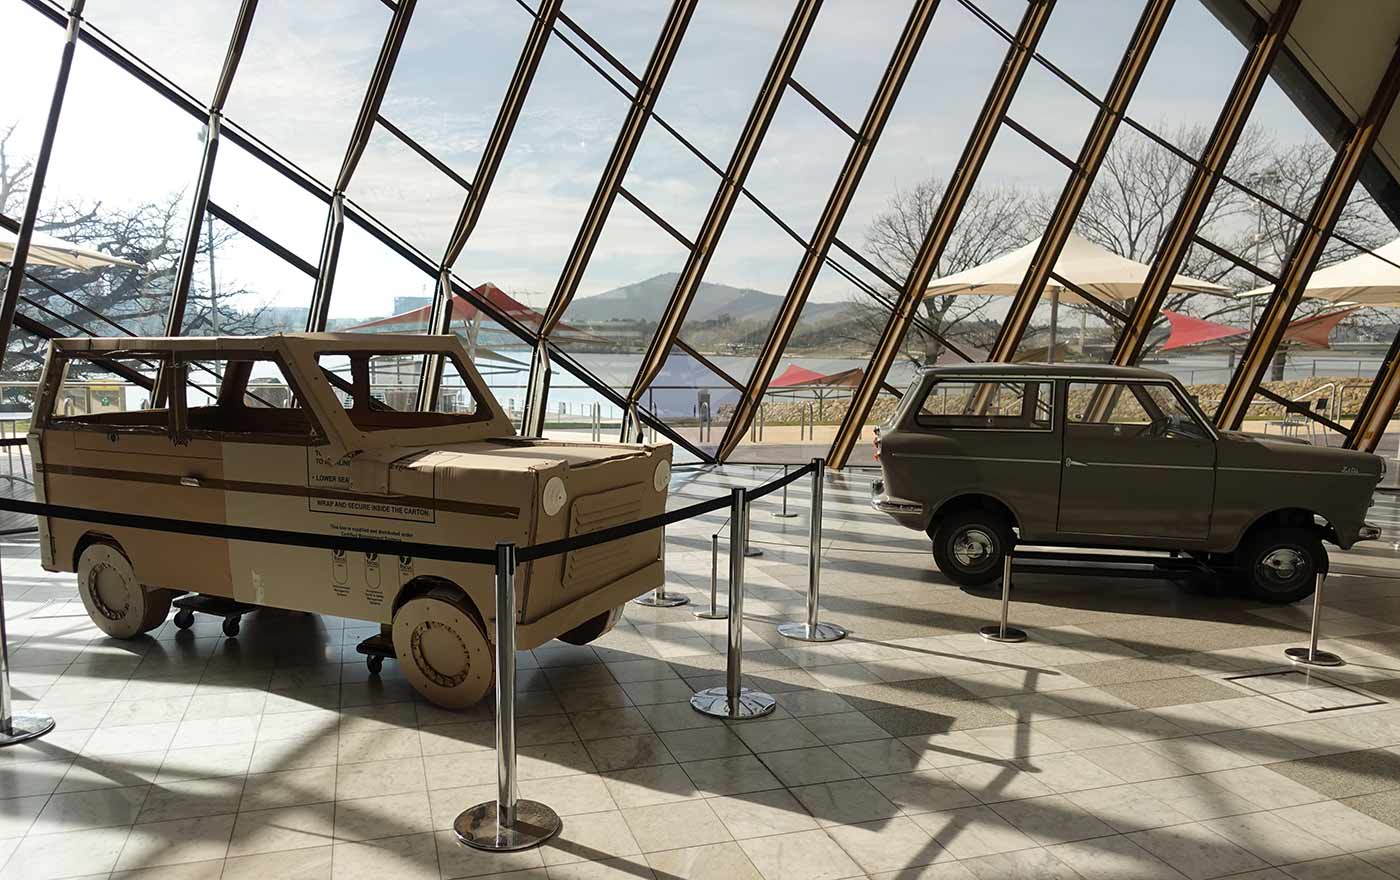 Zeta car model and a cardboard representation of it on display in the Gandel Atrium at the National Museum of Australia.